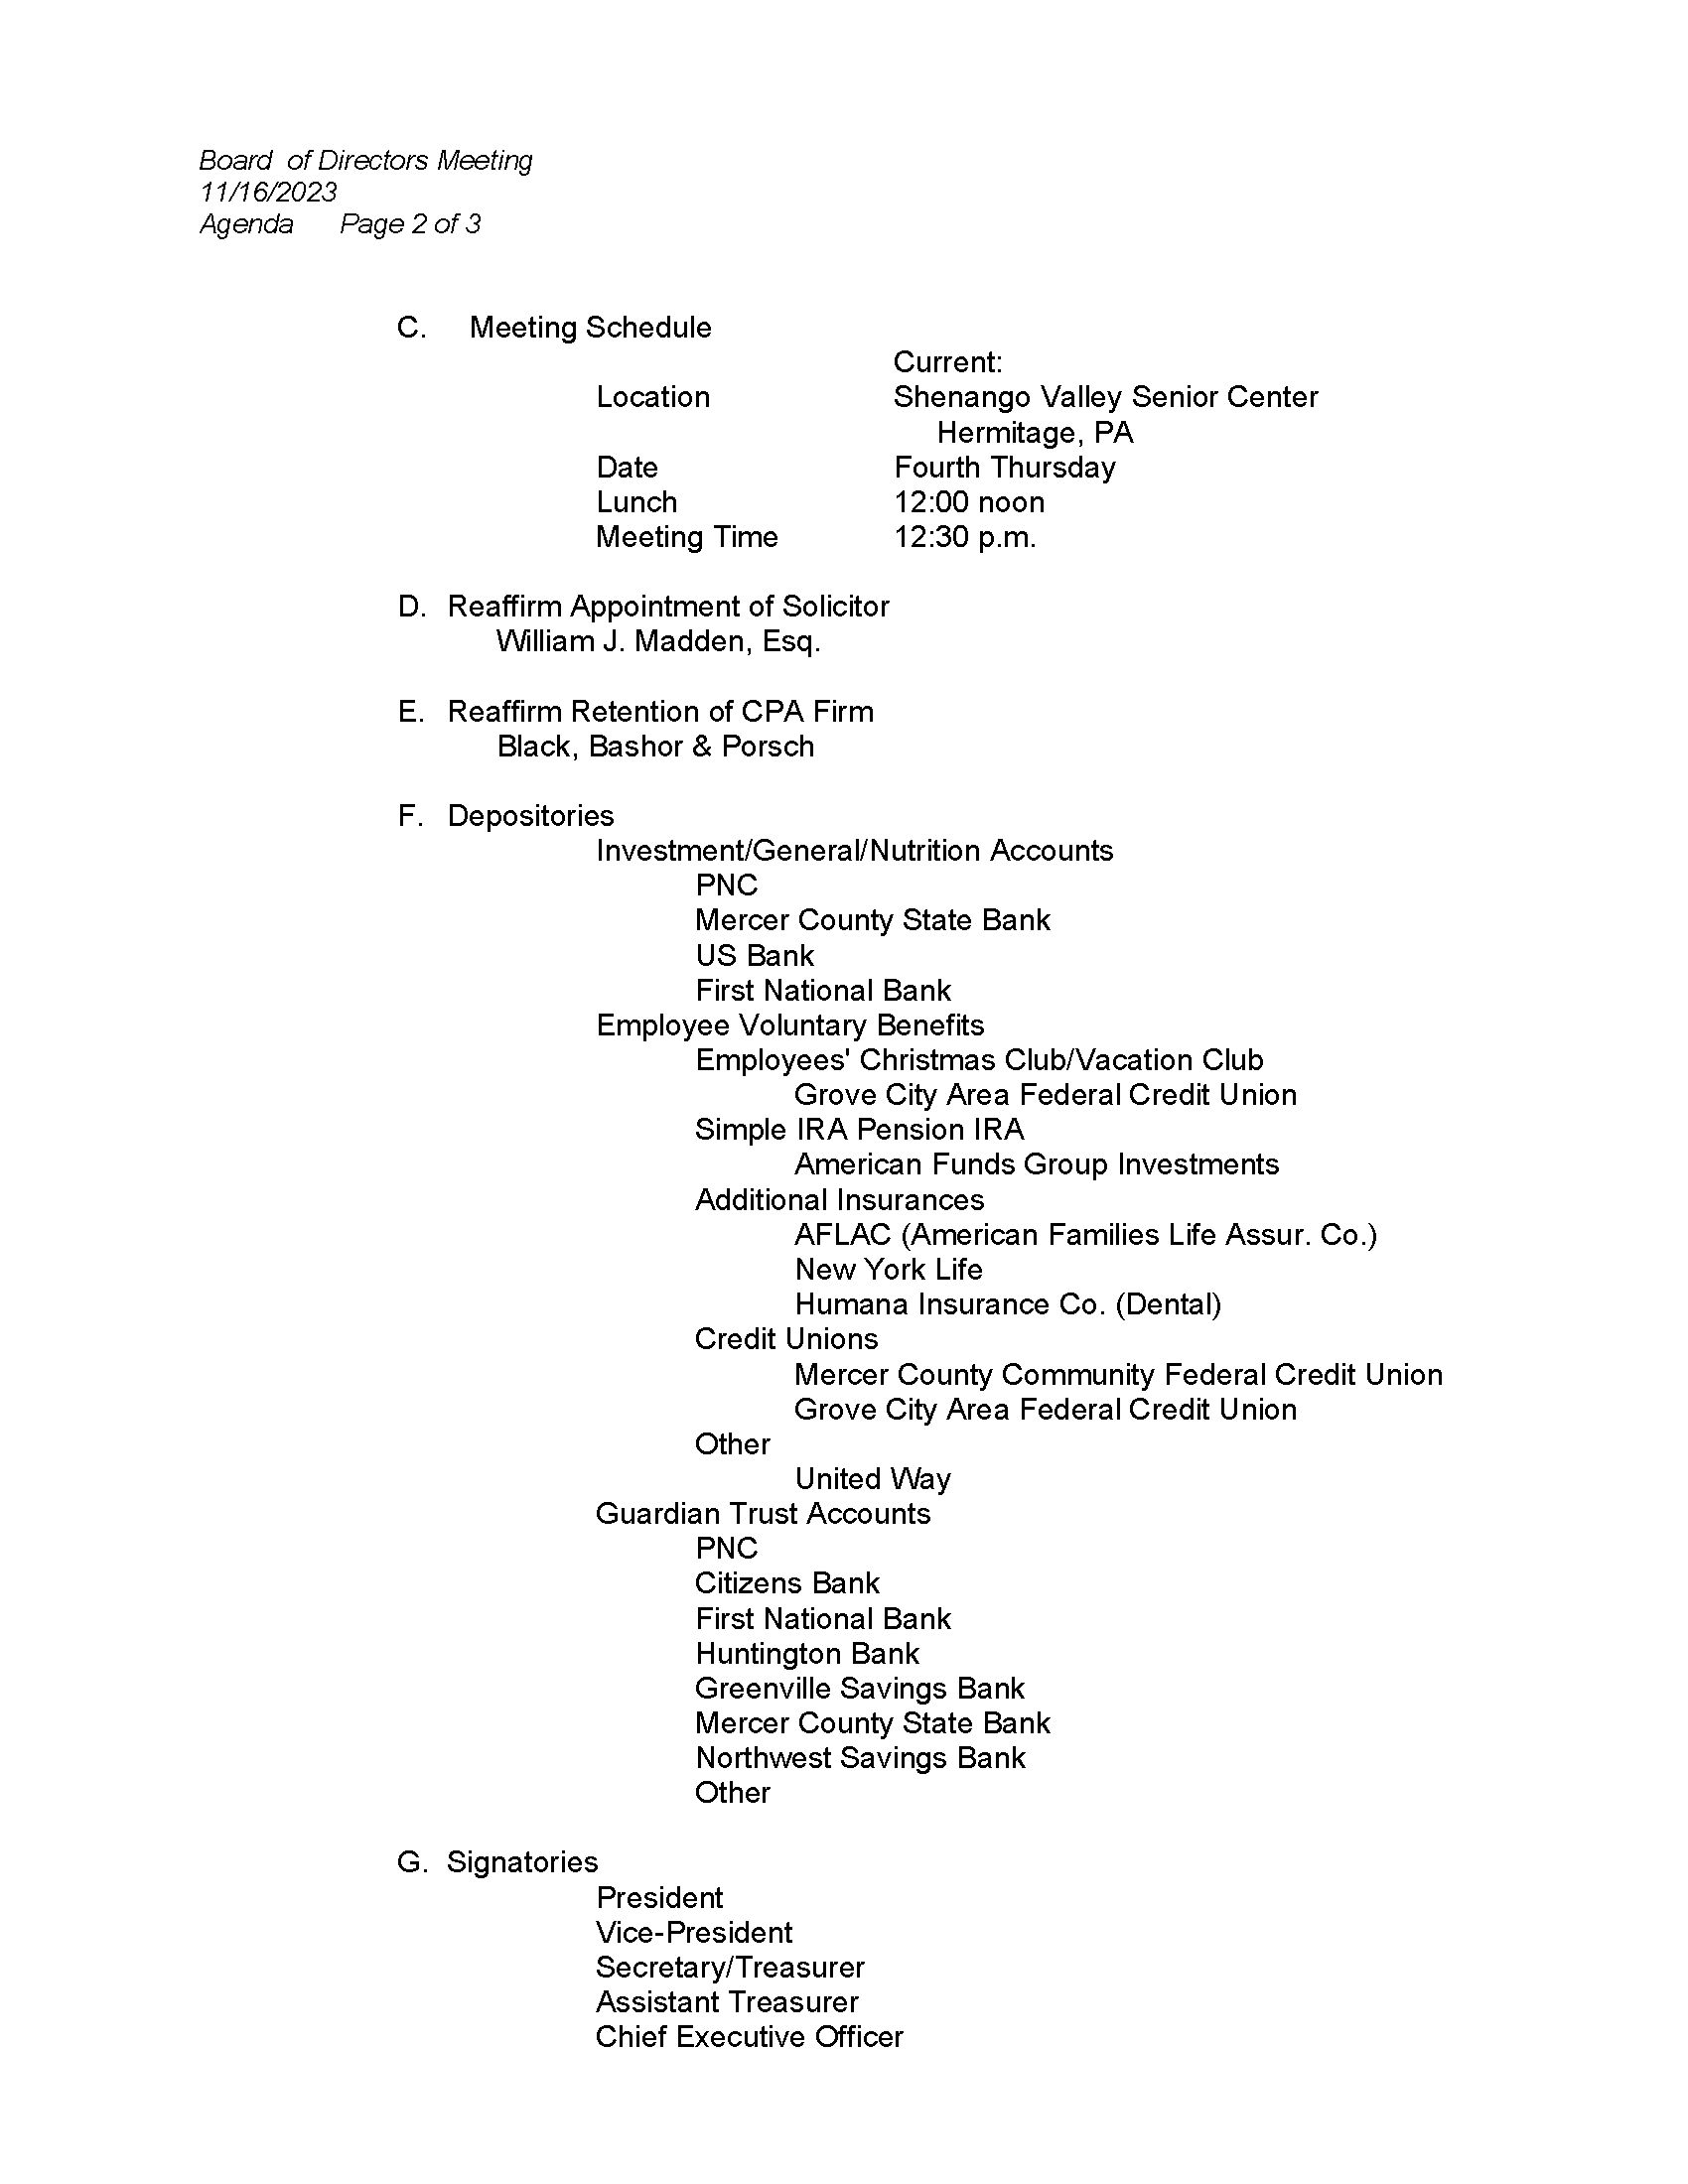 11_16_2023_Board_of_Directors_Annual_Meeting_Agenda_Page_2.png